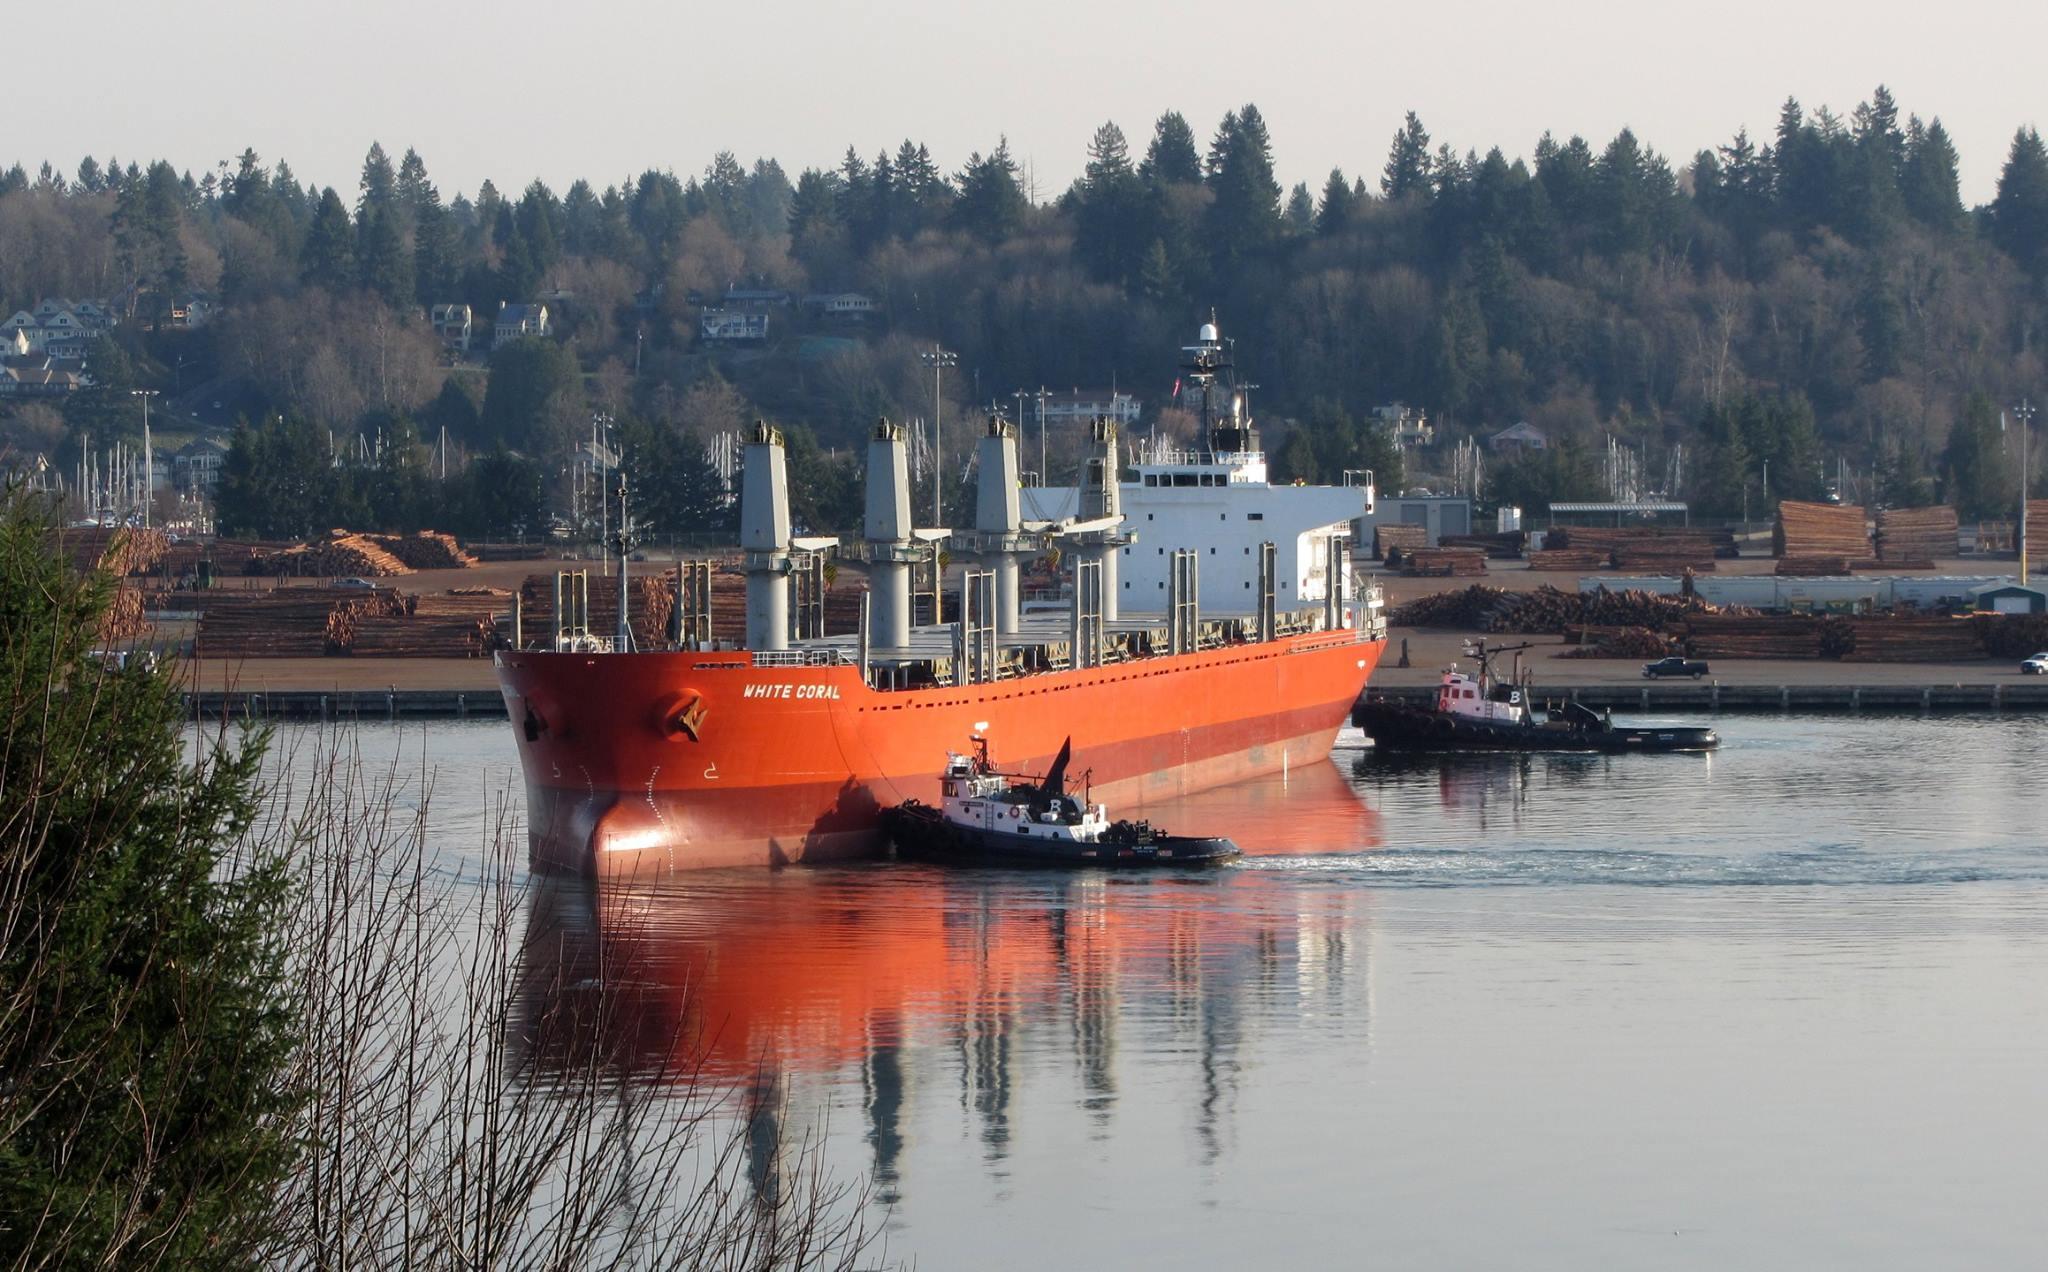 The Port of Olympia does a steady business exporting logs to China and Japan for Weyerhaeuser. Wood is now hit by a retaliatory tariff. CREDIT: TOM BANSE